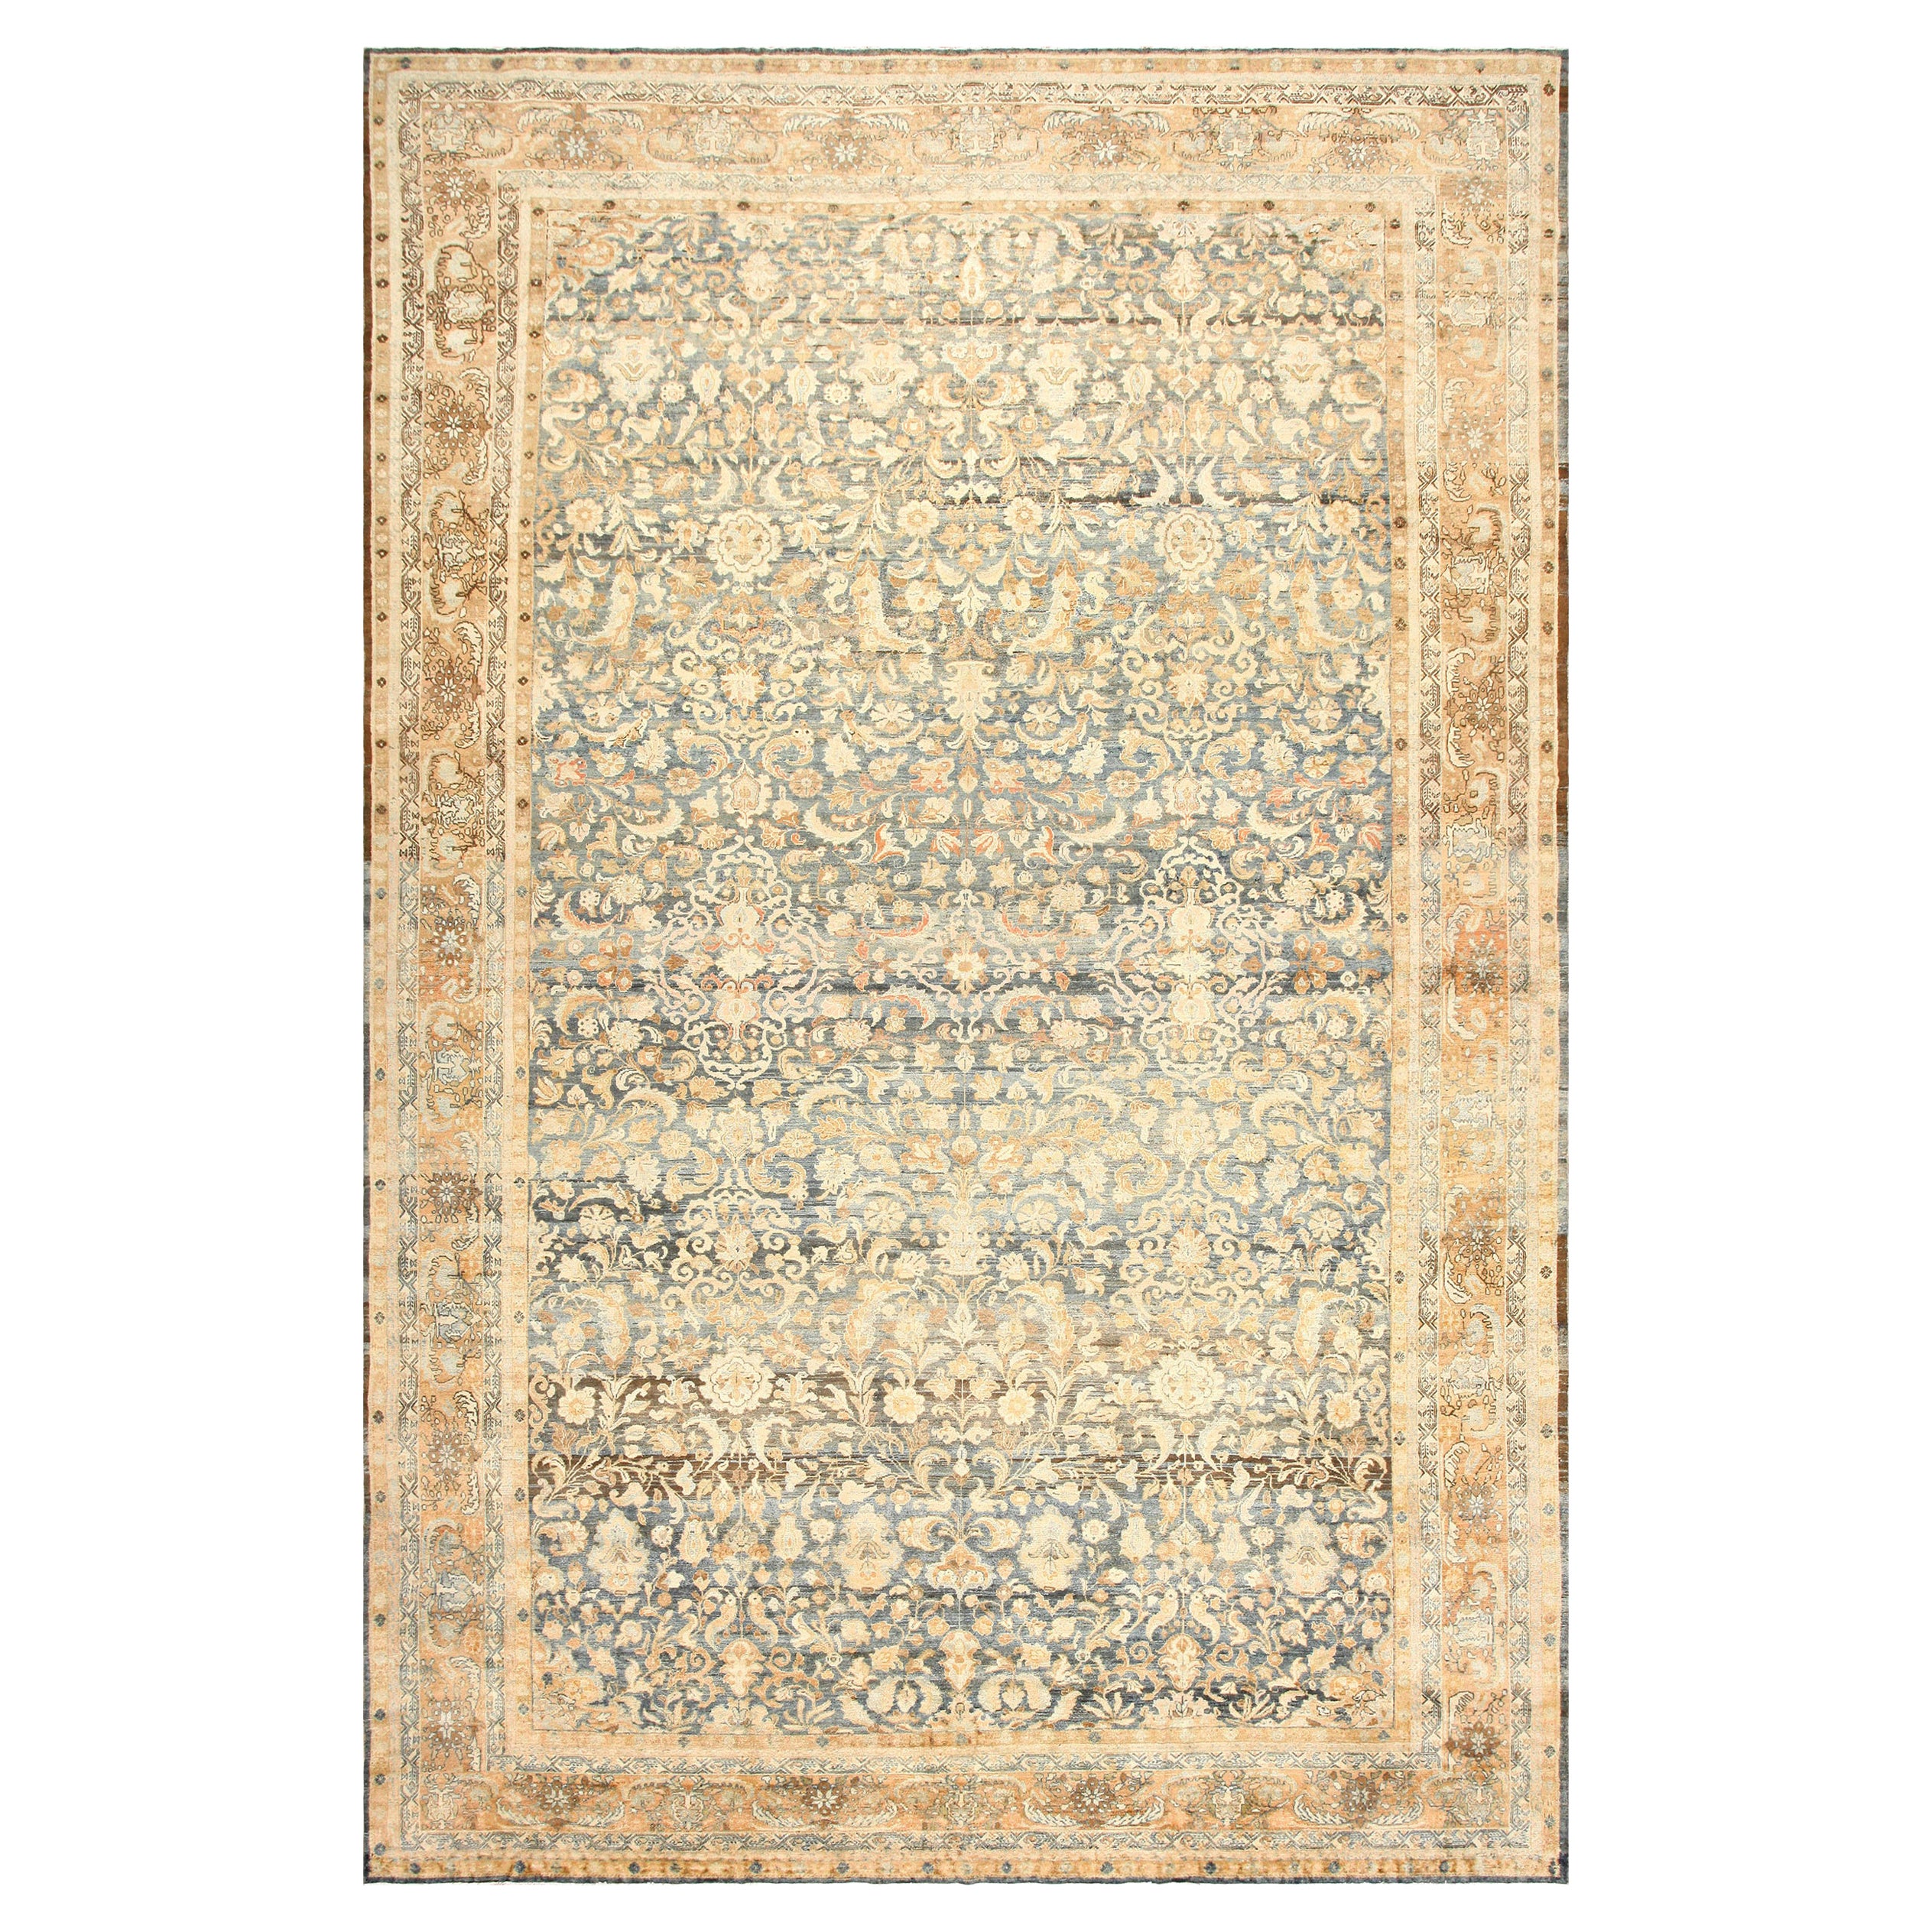 Antique Persian Malayer Rug. Size: 12 ft x 18 ft